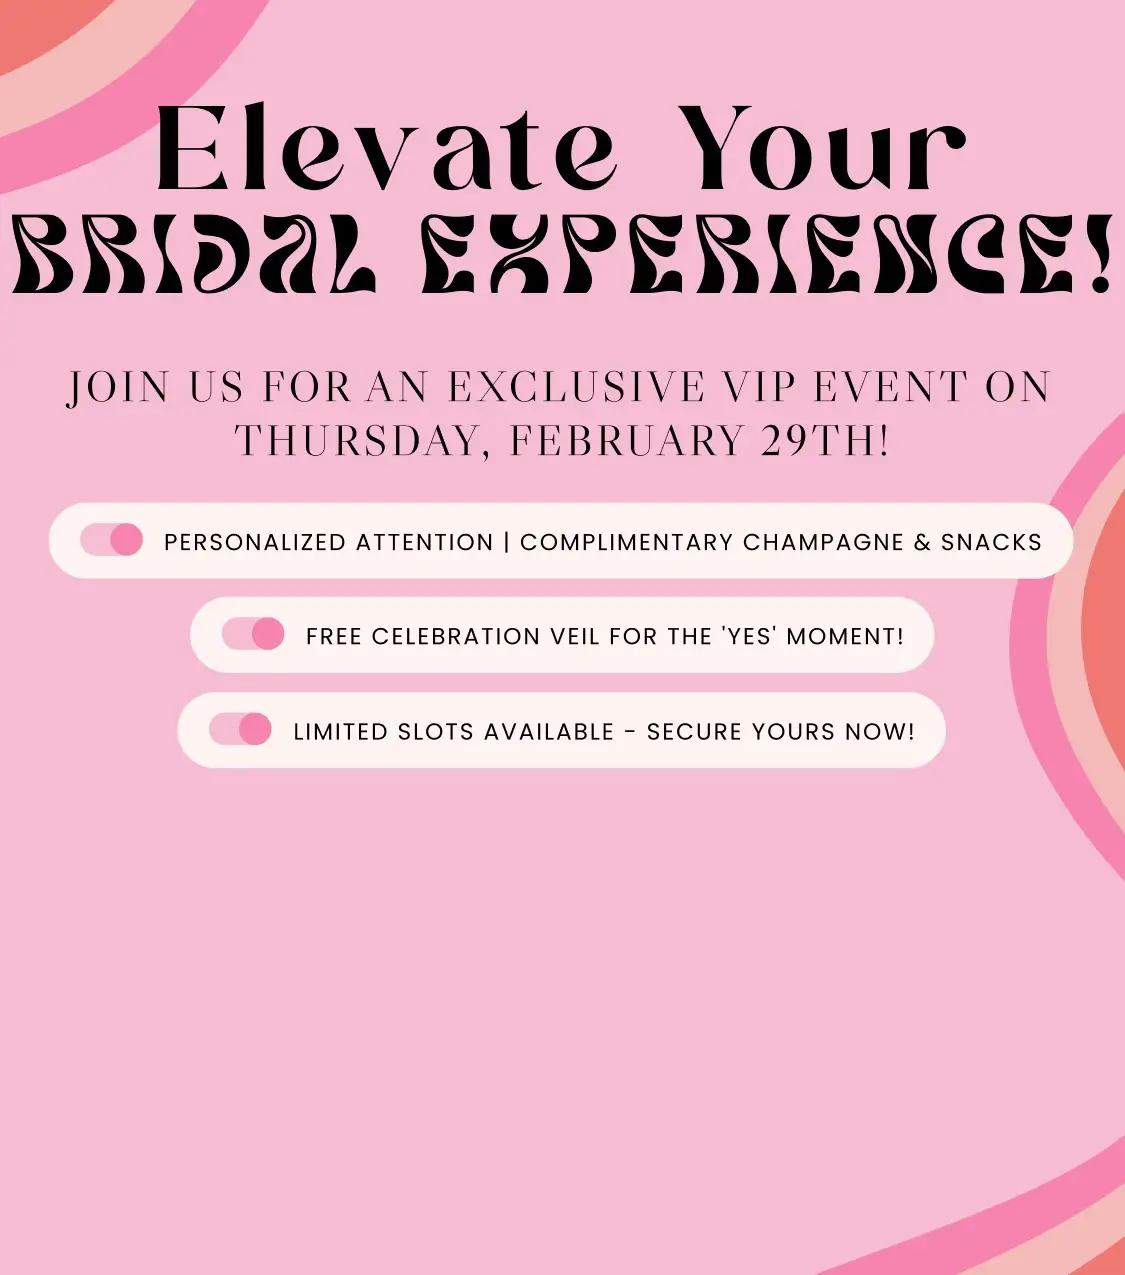 Join Us for an Exclusive VIP Event on Thursday, February 29th!